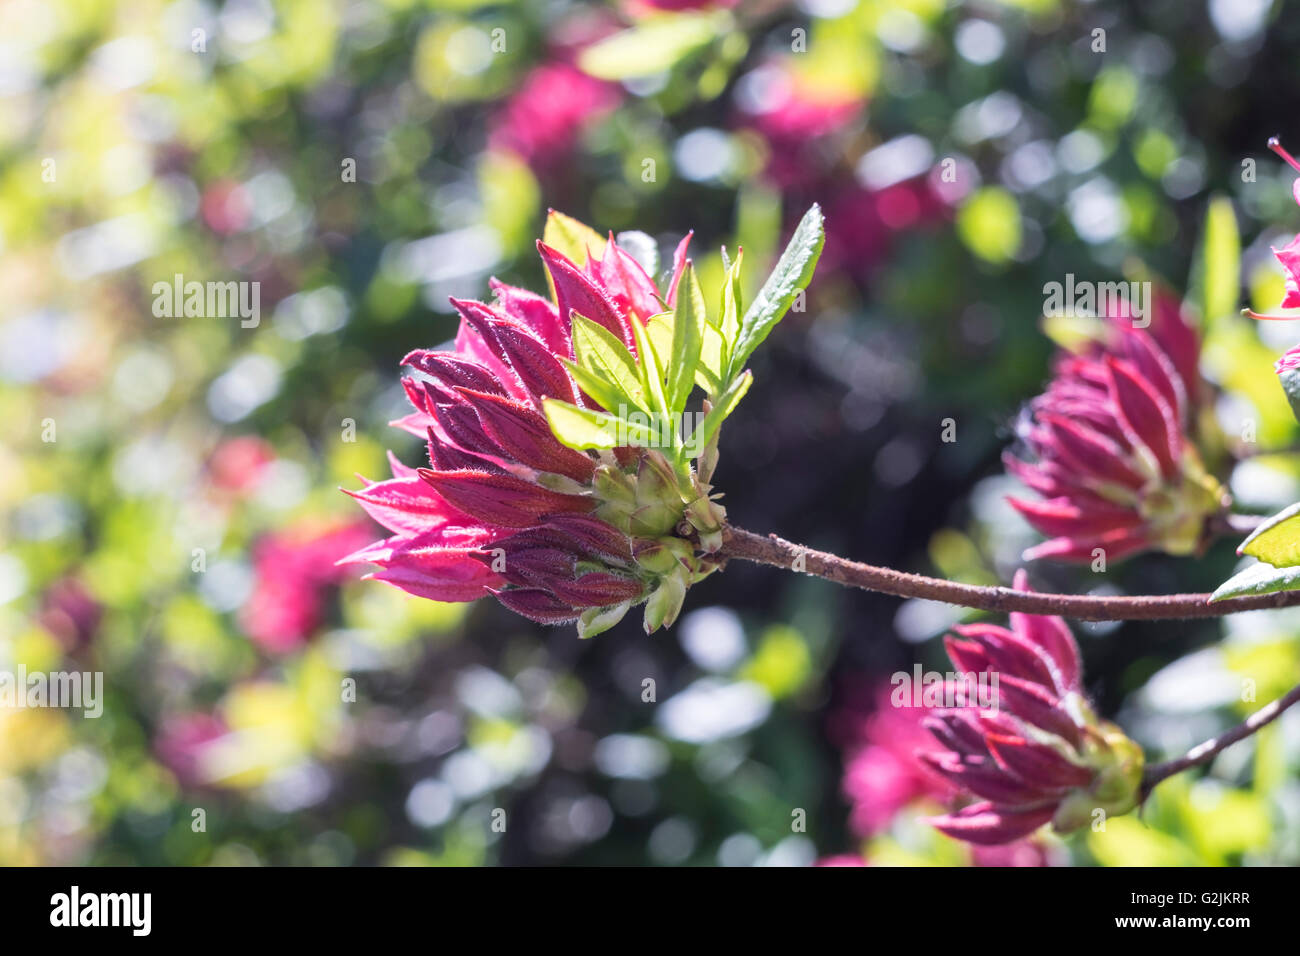 Rhododendron with dark pink petals against soft out of focus background Stock Photo